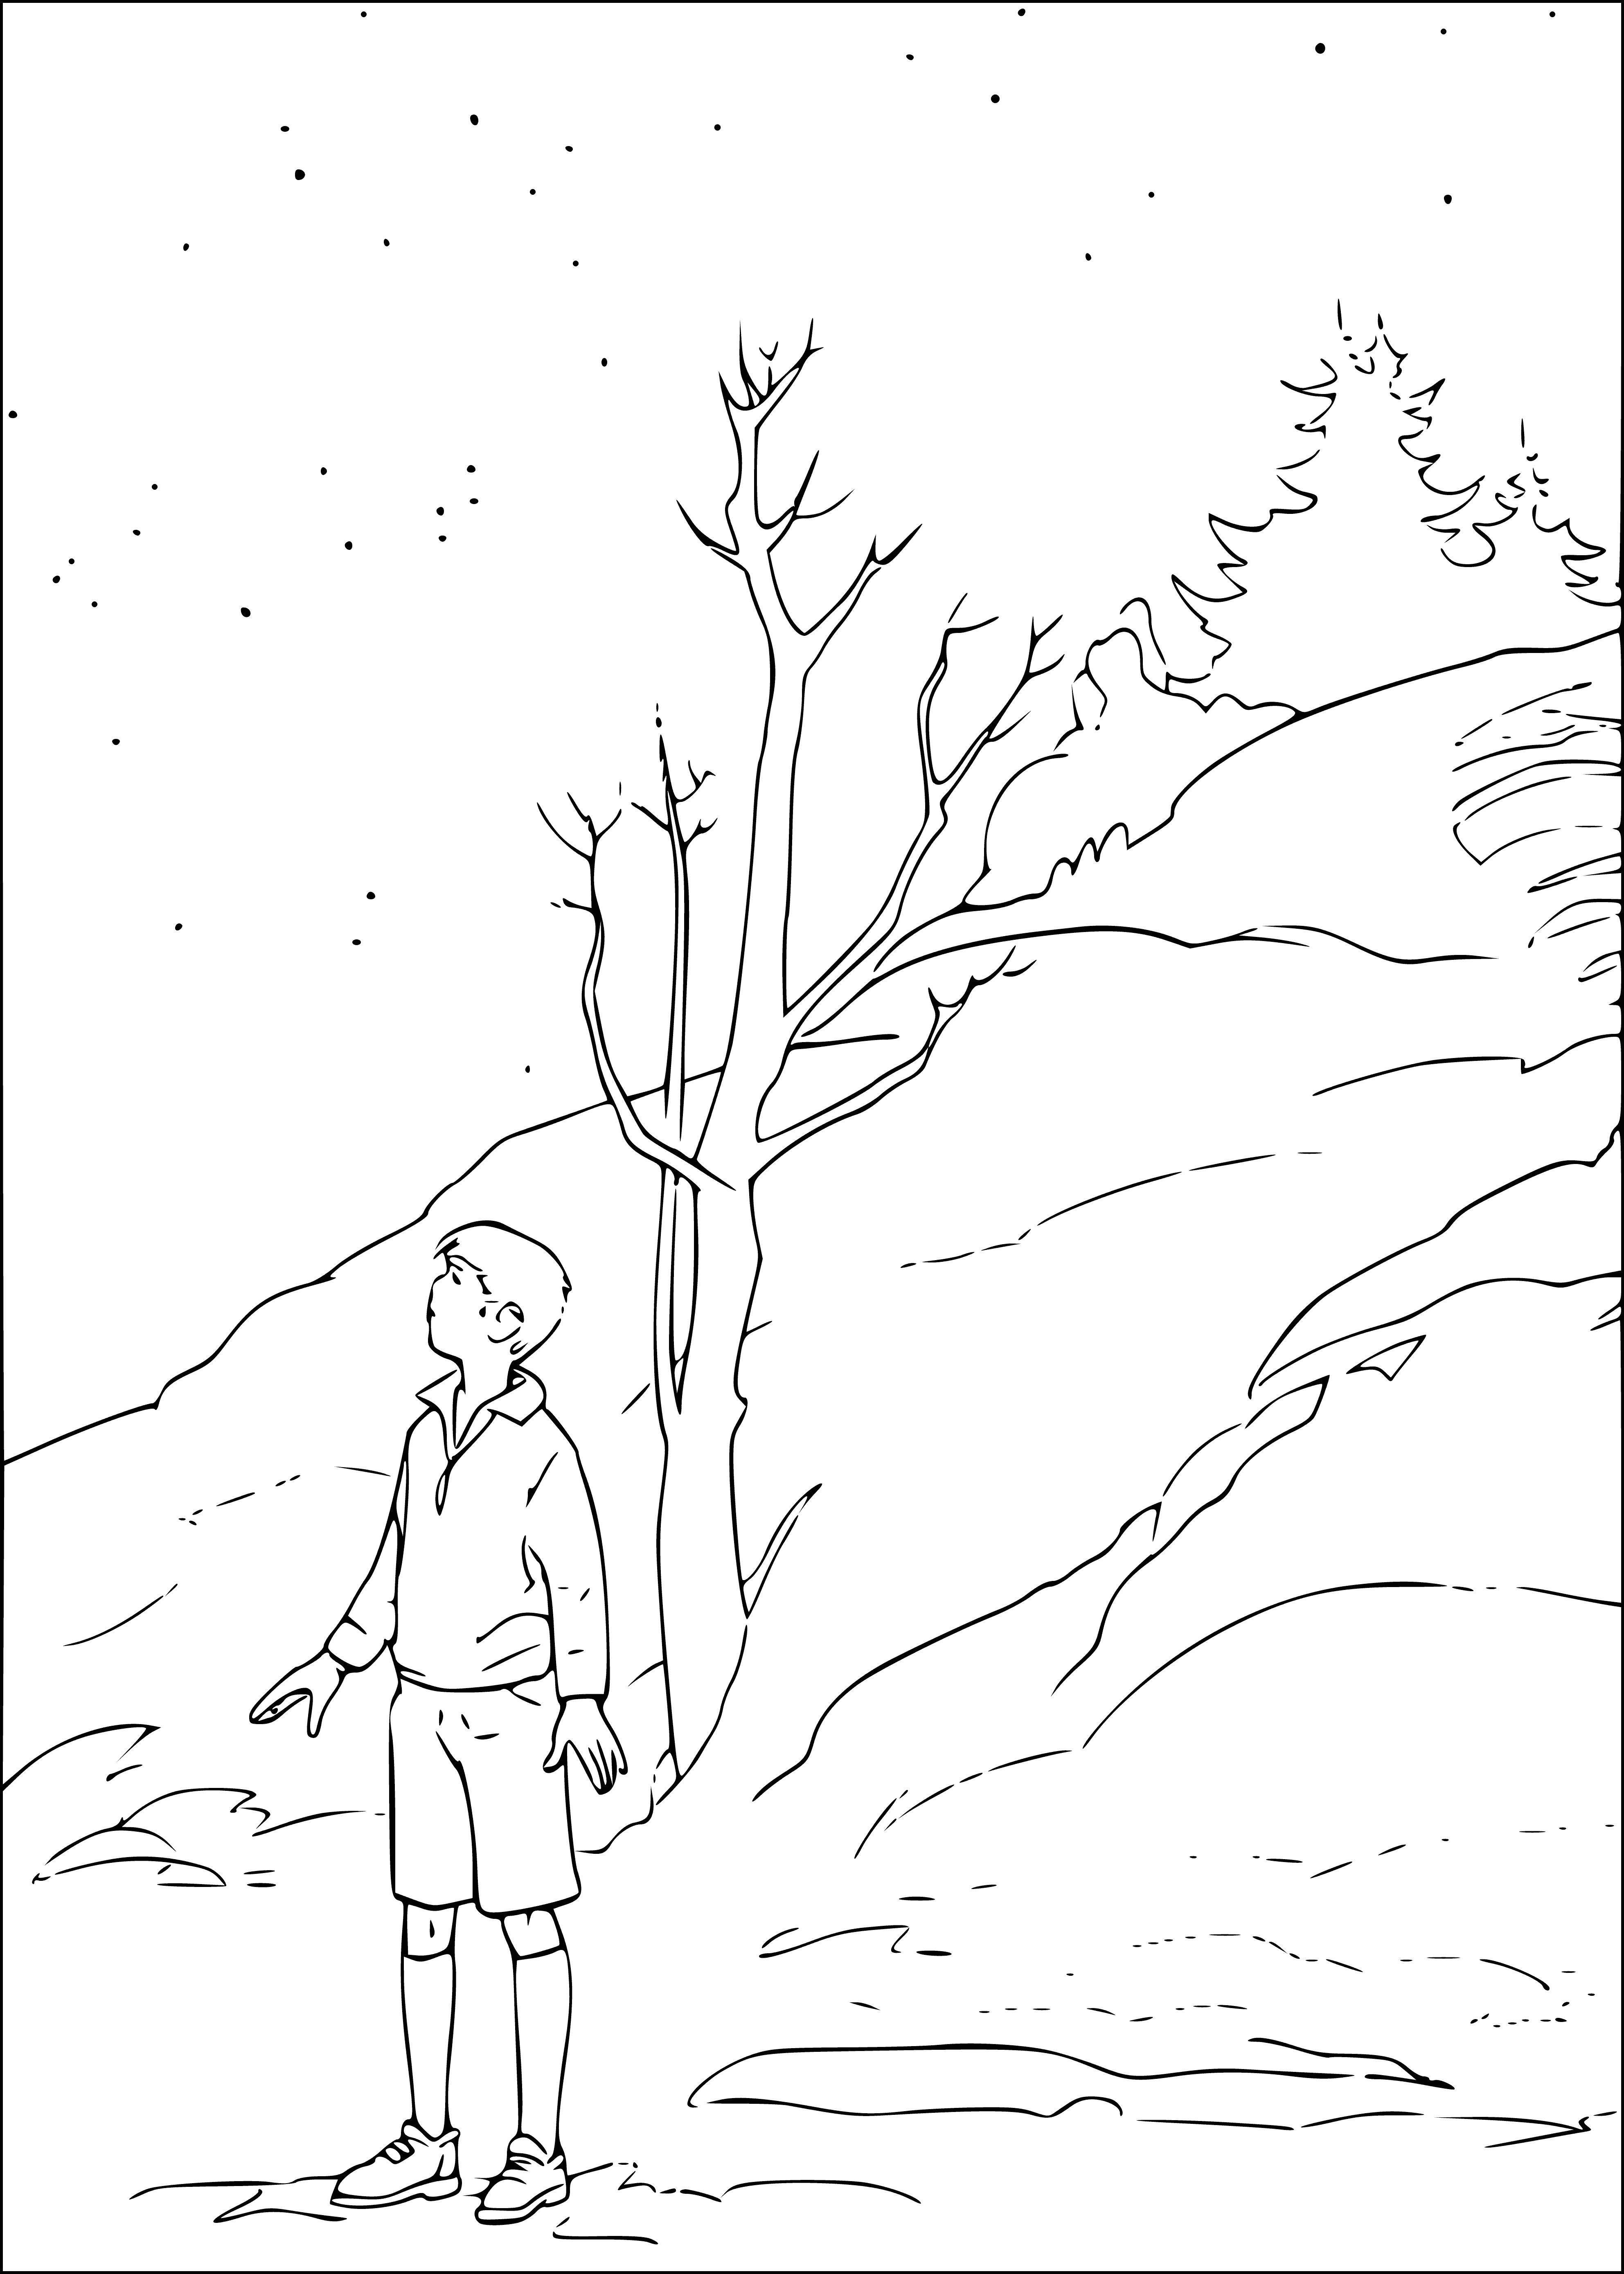 Traitor Edmund coloring page